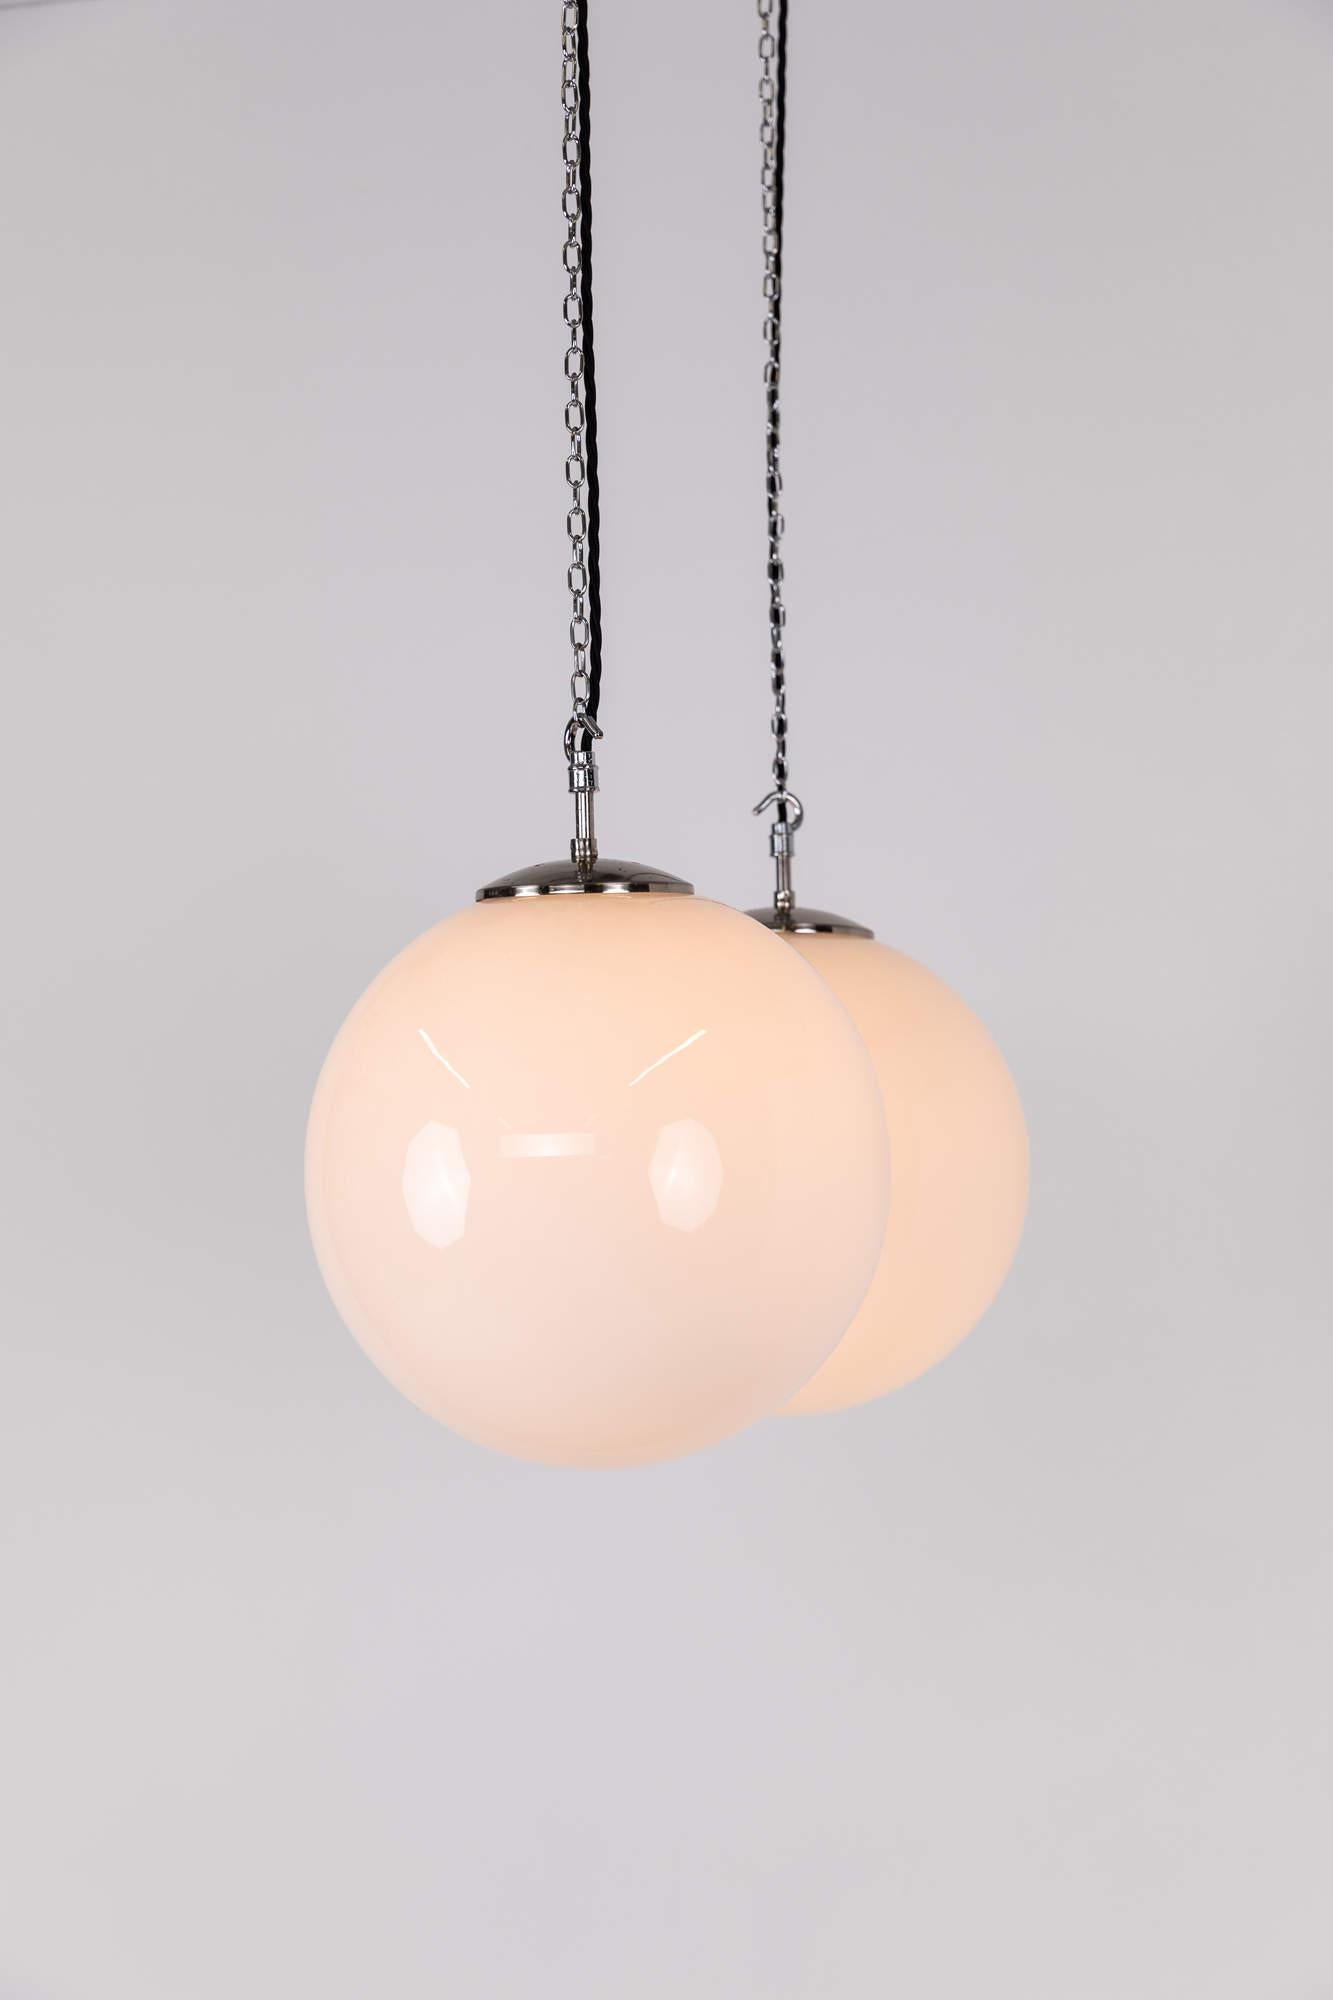 Large Art Deco Globe Opaline Glass Pendant Lamp Chrome Gallery, C.1940 In Good Condition For Sale In London, GB